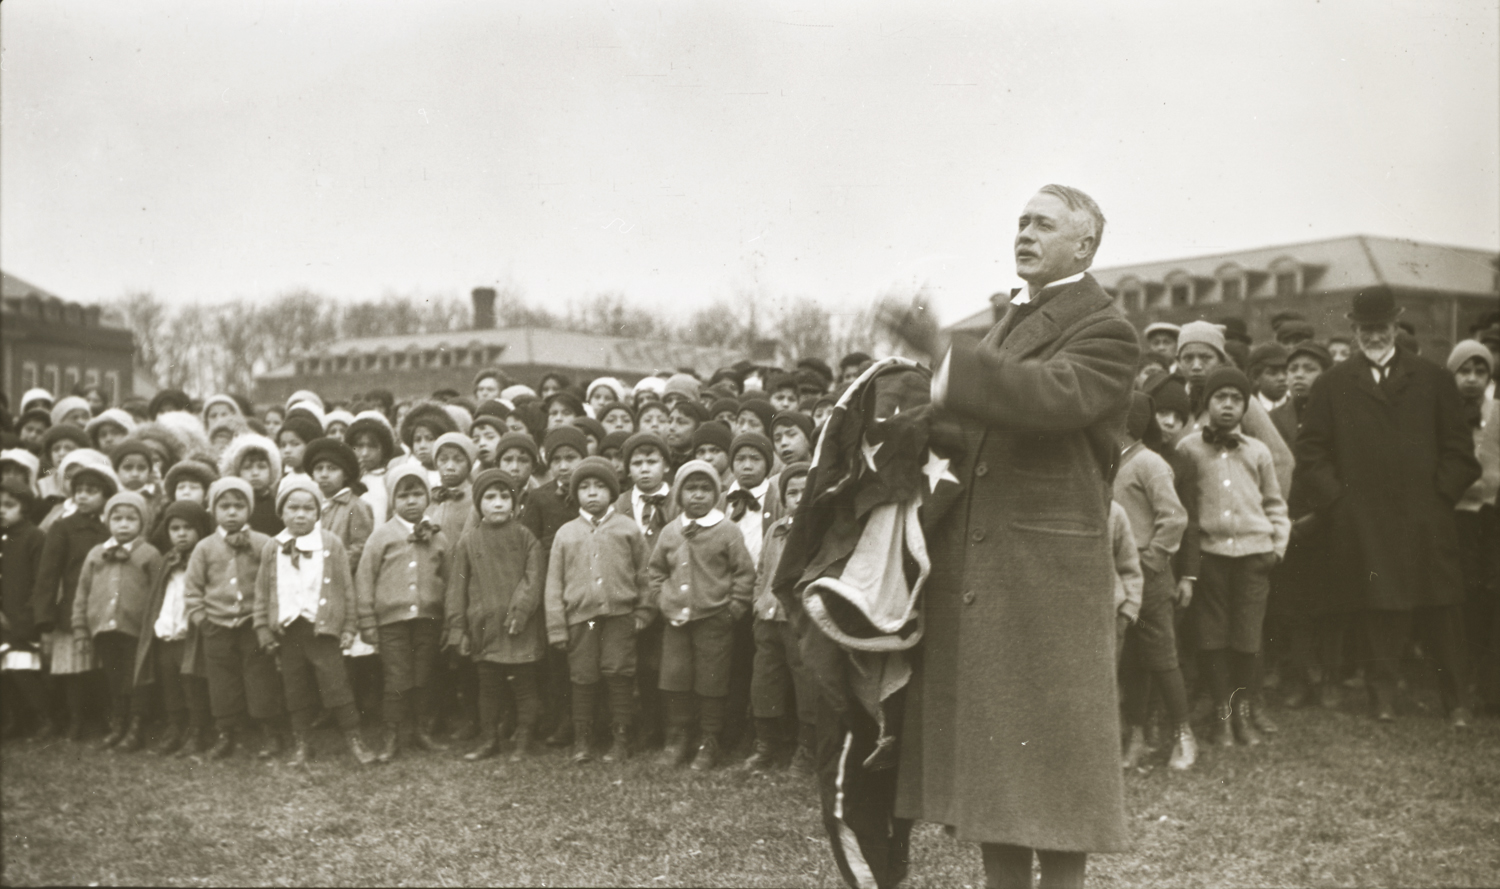 Thomas Indian School Children Listening to Dr. Dixon, November 28, 1913. Photograph by Joseph Dixon. Courtesy of the Mathers Museum of World Cultures, Wanamaker Collection, Indiana University, Bloomington, I.N., W-4311.